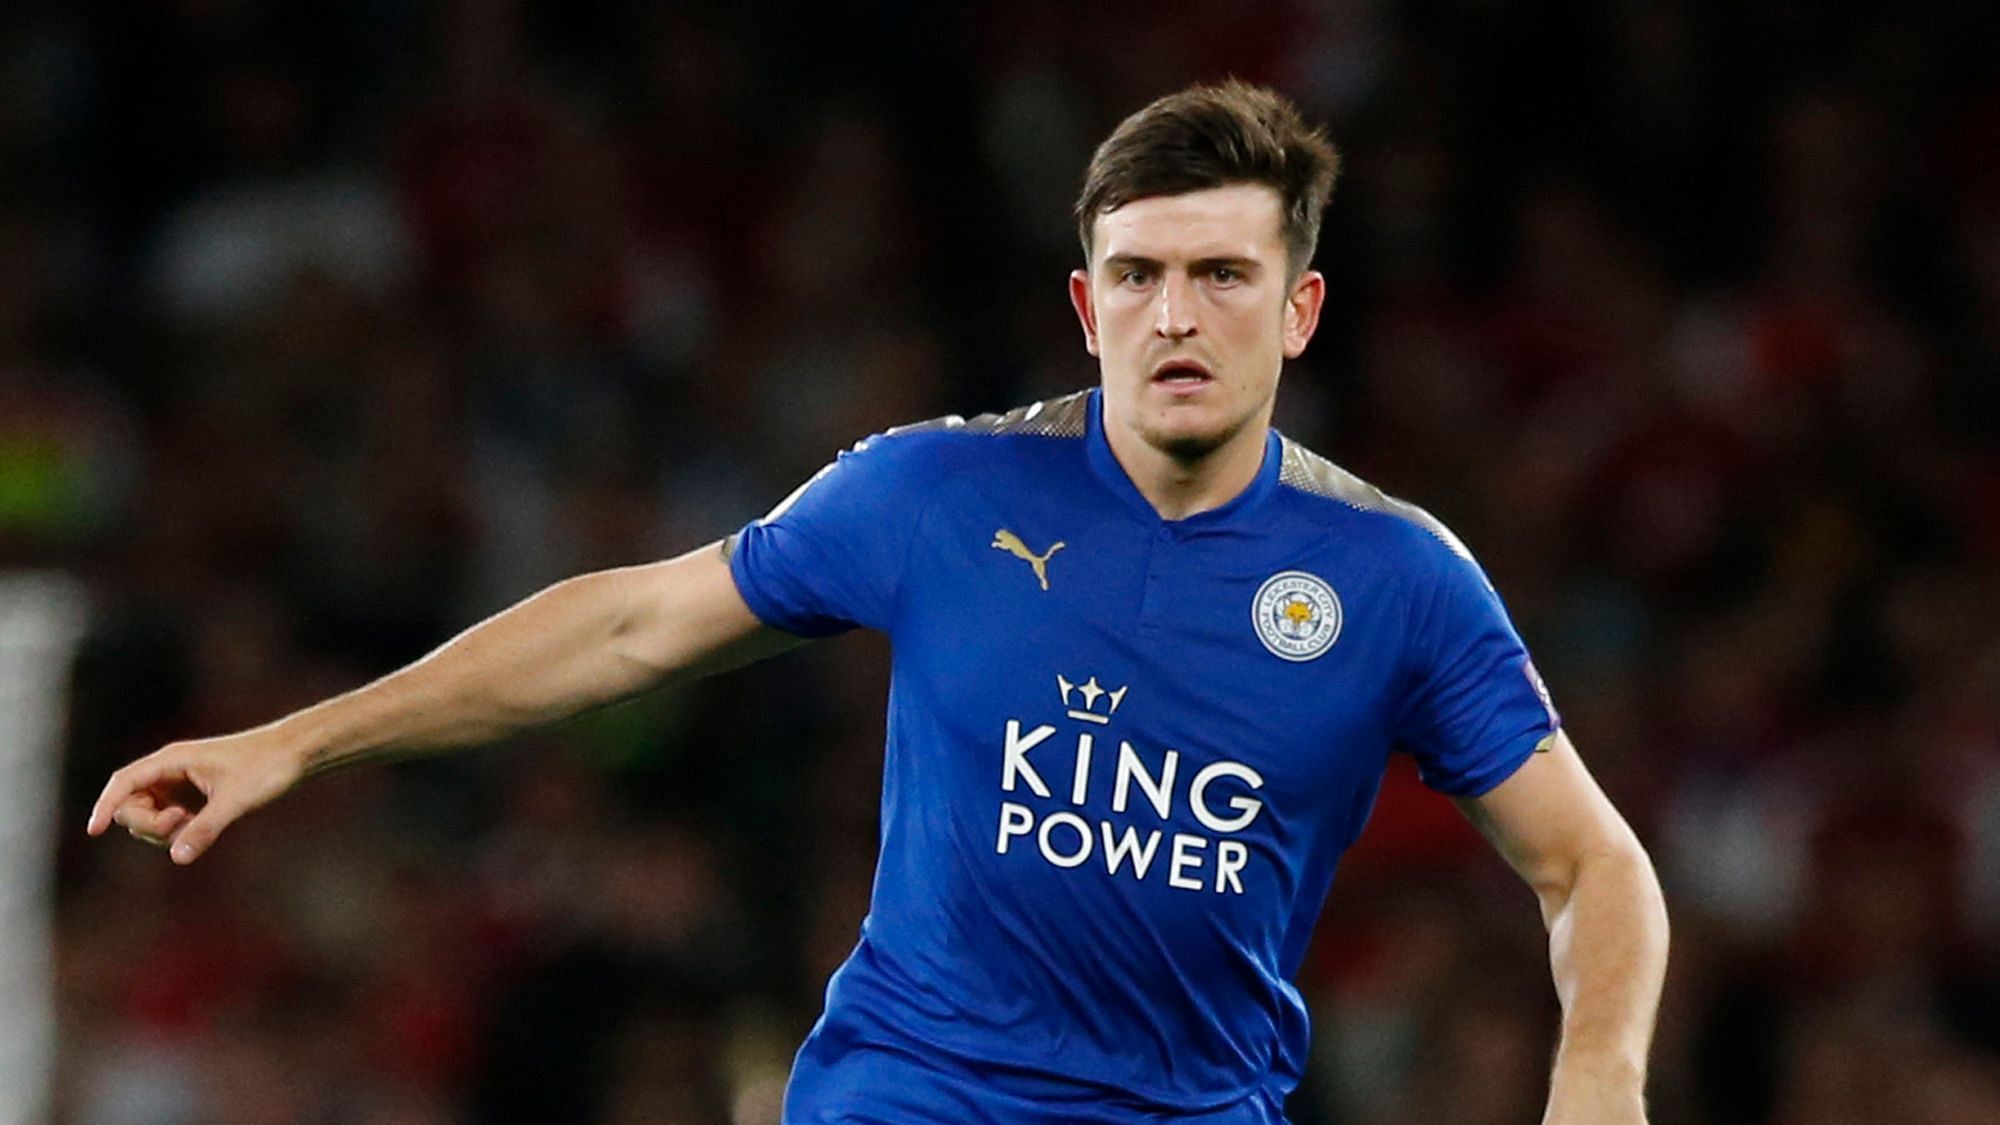 Manchester United made Harry Maguire the world’s most expensive defender on Monday, signing him from Leicester for around $100 million.